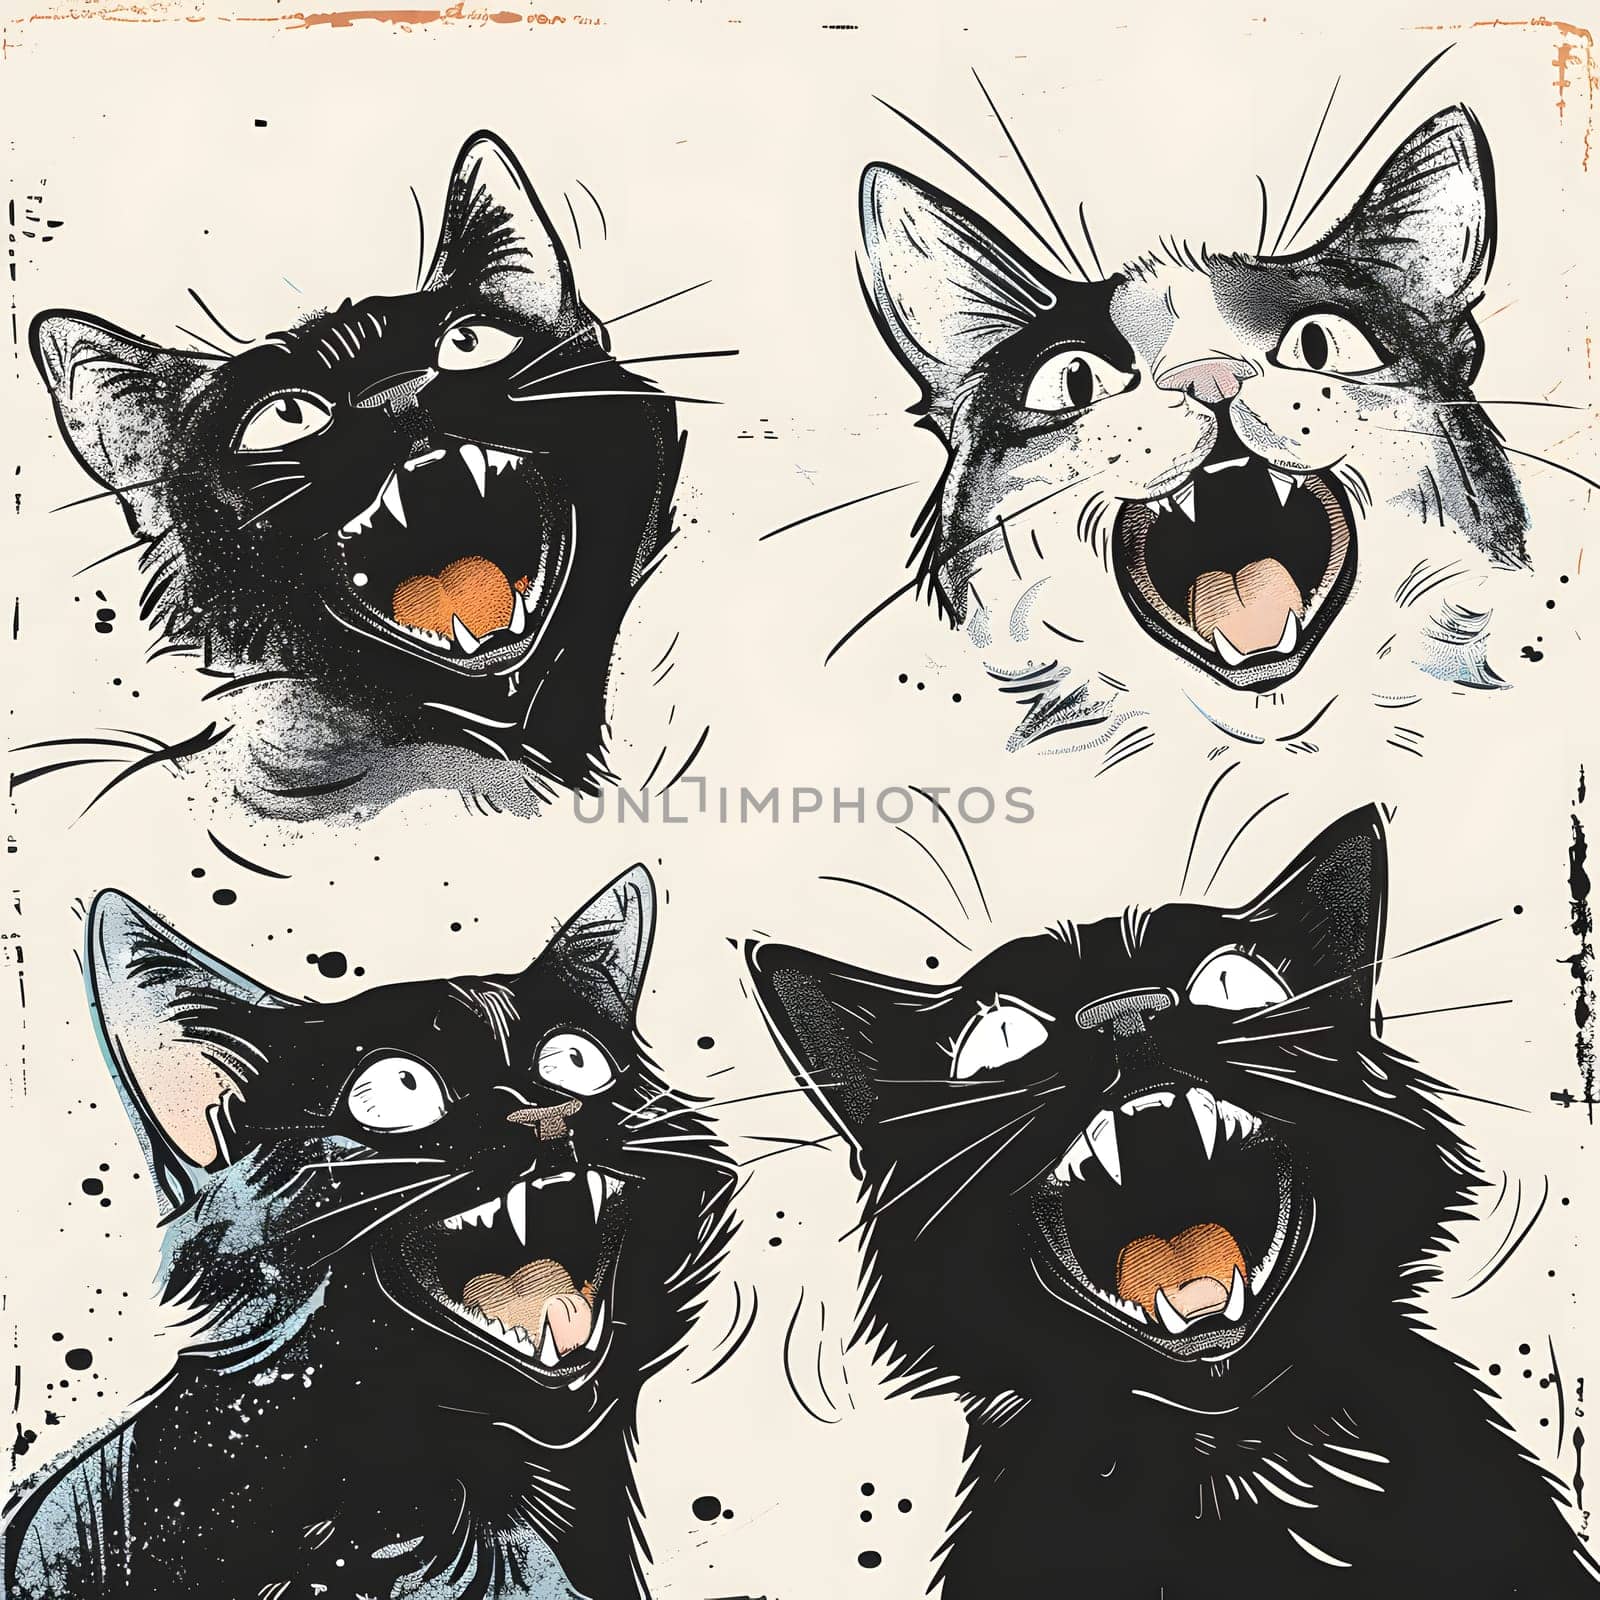 A painting of four black cats, members of the Felidae family. The carnivorous mammals are depicted with their mouths open, showcasing their whiskers and vertebrate features